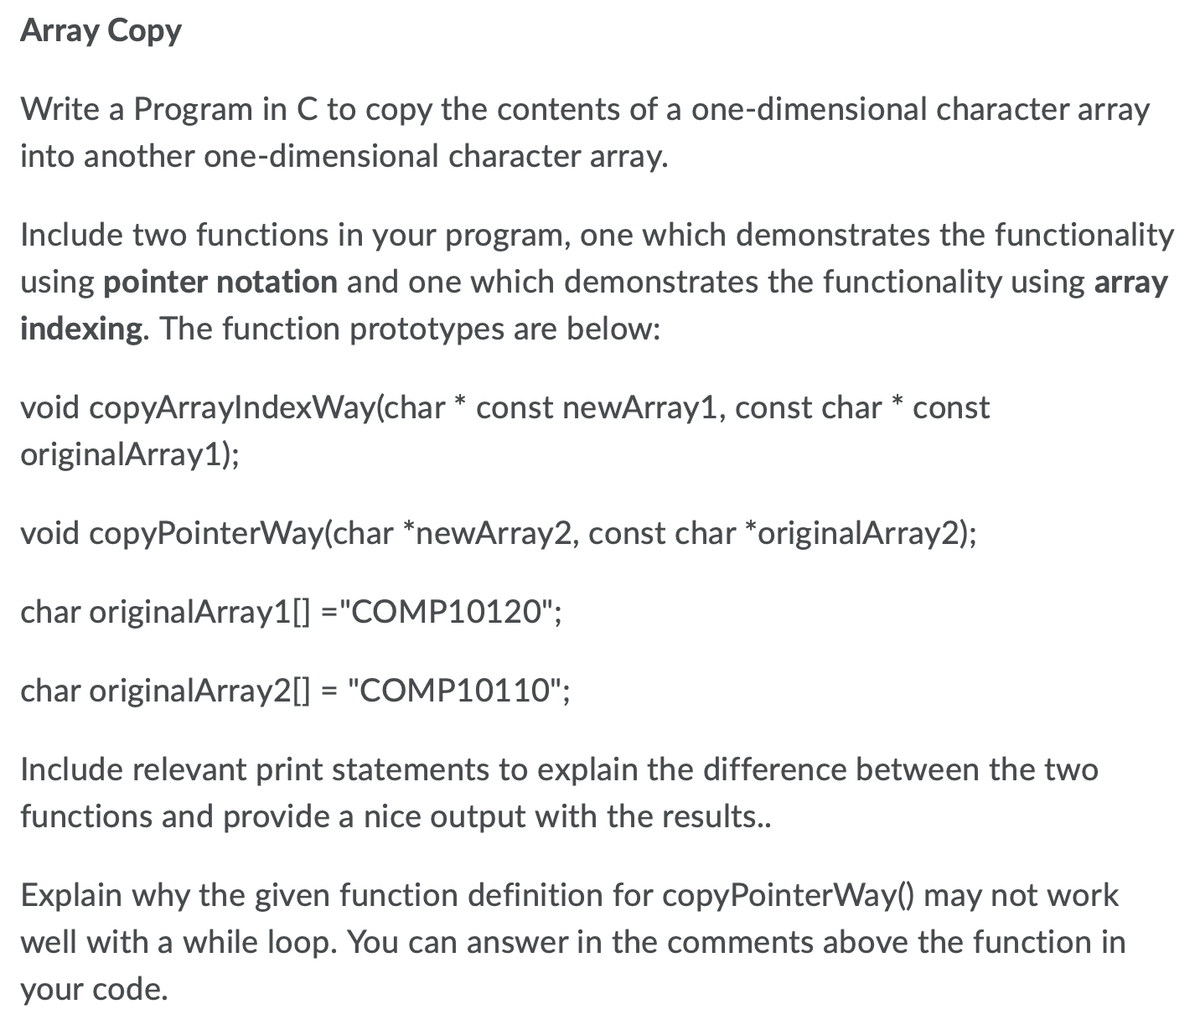 Array Copy
Write a Program in C to copy the contents of a one-dimensional character array
into another one-dimensional character array.
Include two functions in your program, one which demonstrates the functionality
using pointer notation and one which demonstrates the functionality using array
indexing. The function prototypes are below:
void copyArraylndexWay(char * const newArray1, const char * const
originalArray1);
void copyPointerWay(char *newArray2, const char *originalArray2);
char originalArray1[] ="COMP10120";
char originalArray2[] = "COMP10110";
Include relevant print statements to explain the difference between the two
functions and provide a nice output with the results..
Explain why the given function definition for copyPointerWay() may not work
well with a while loop. You can answer in the comments above the function in
your code.
